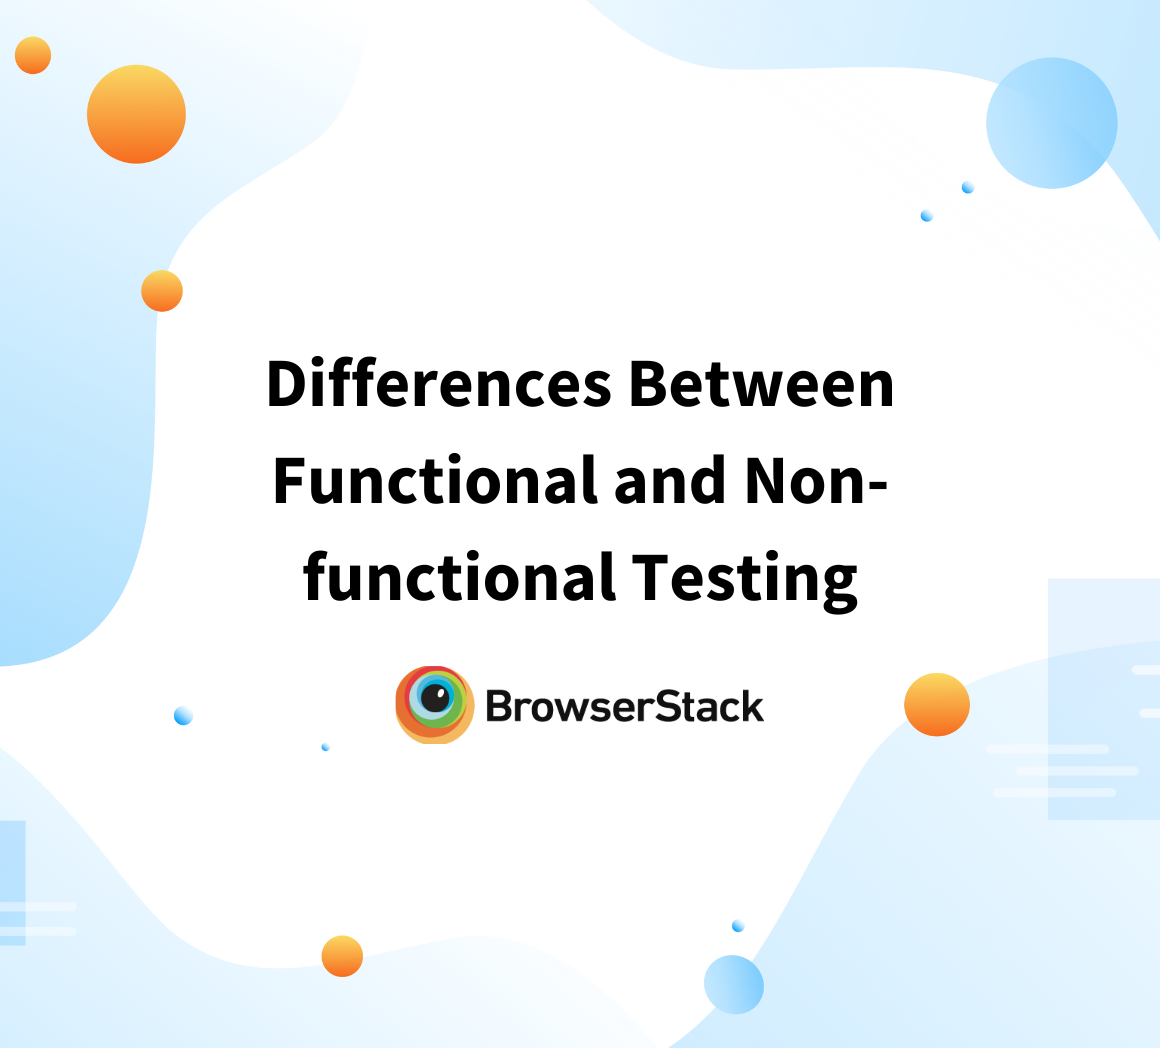 Differences Between Functional and Non-functional Testing